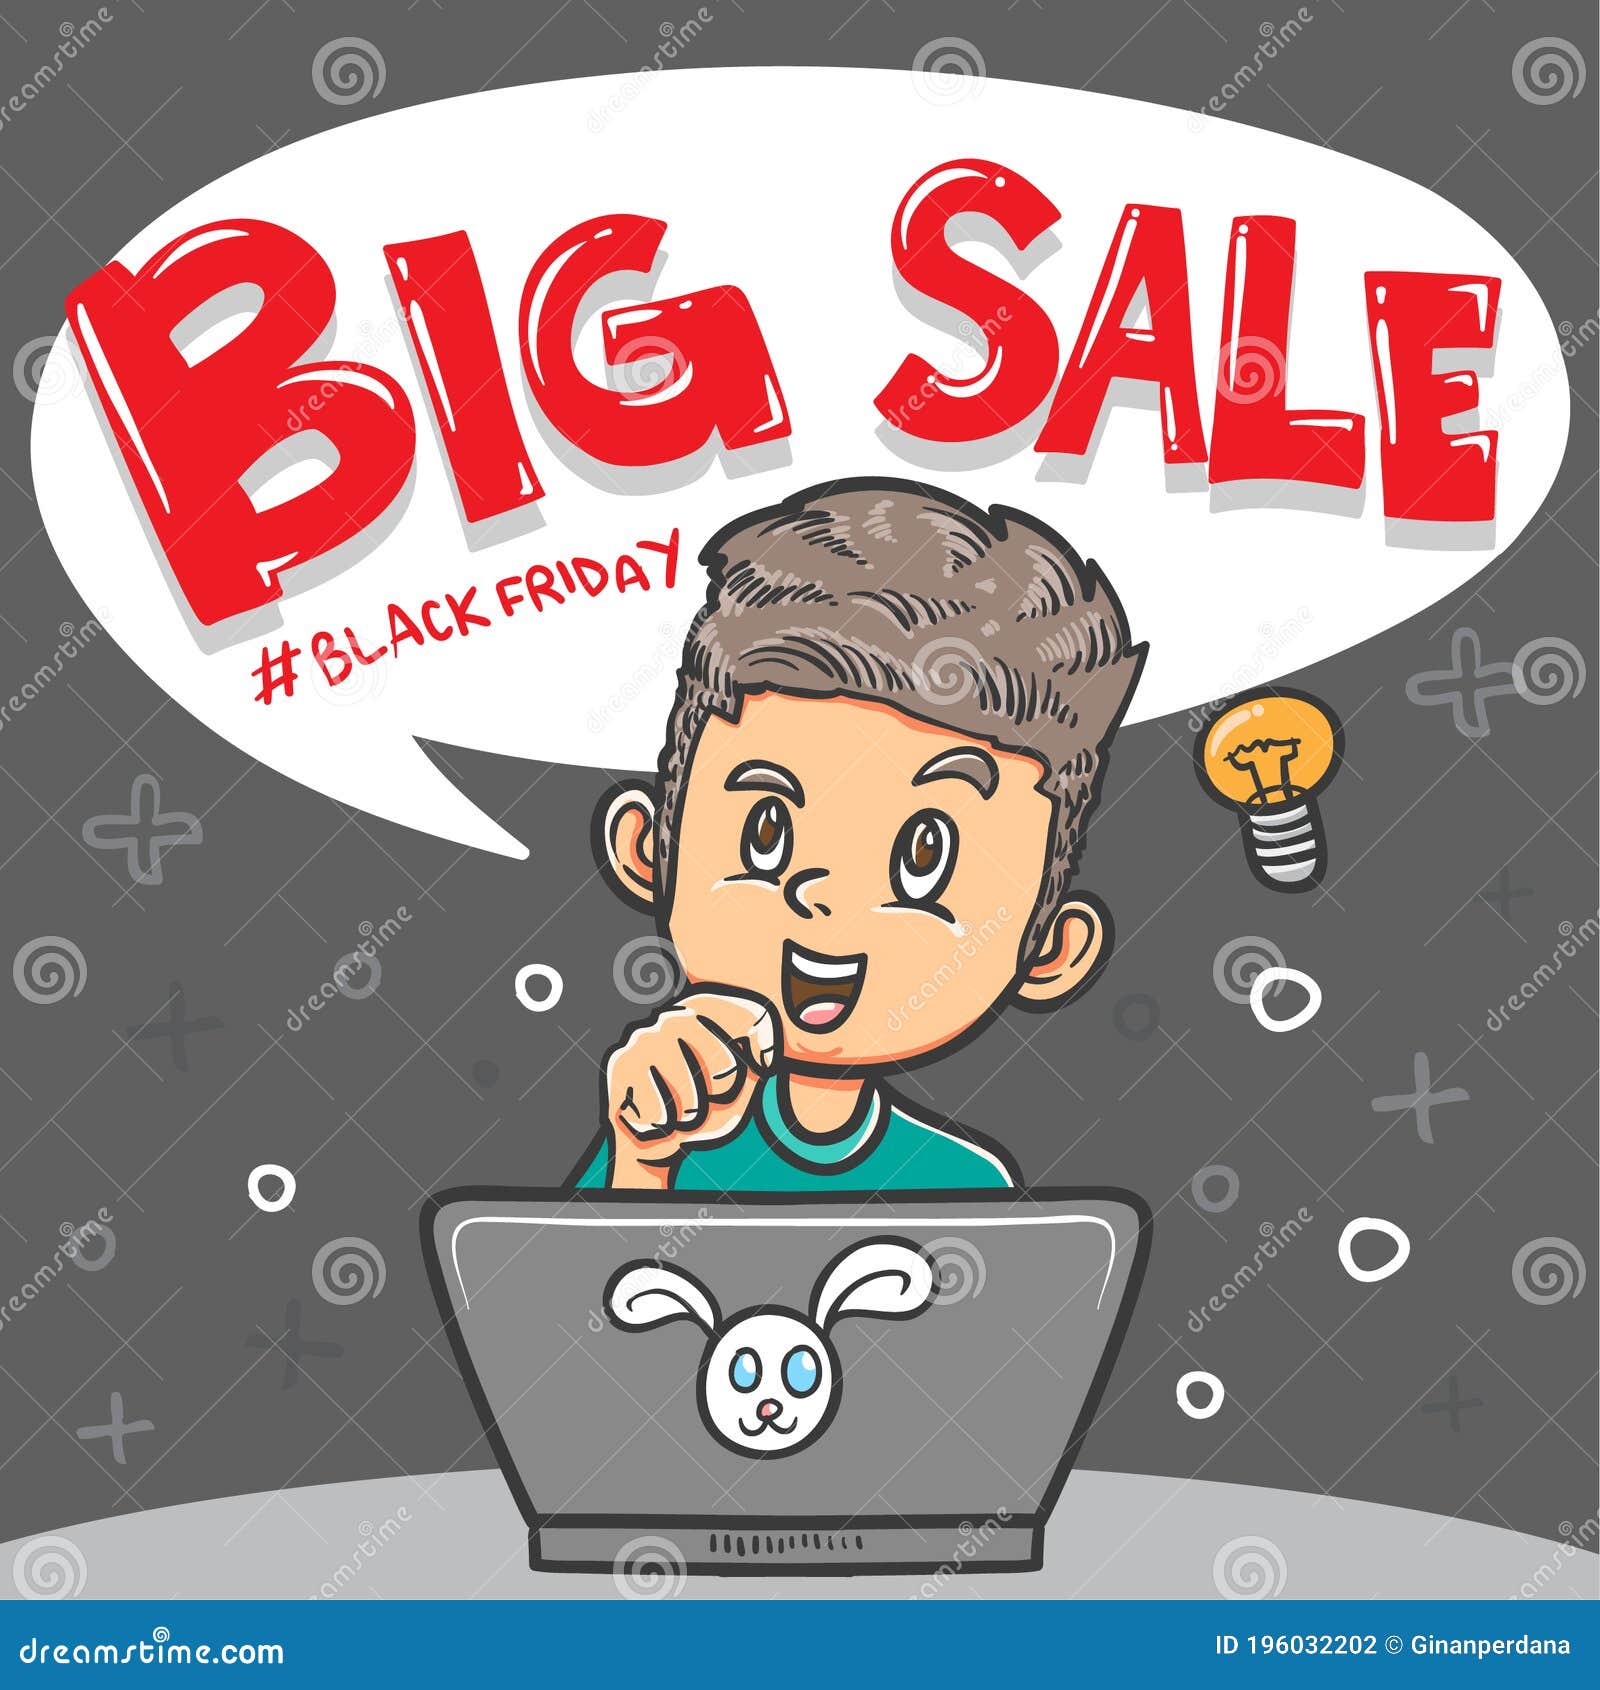 boy character want to participate on blackfriday big sale 